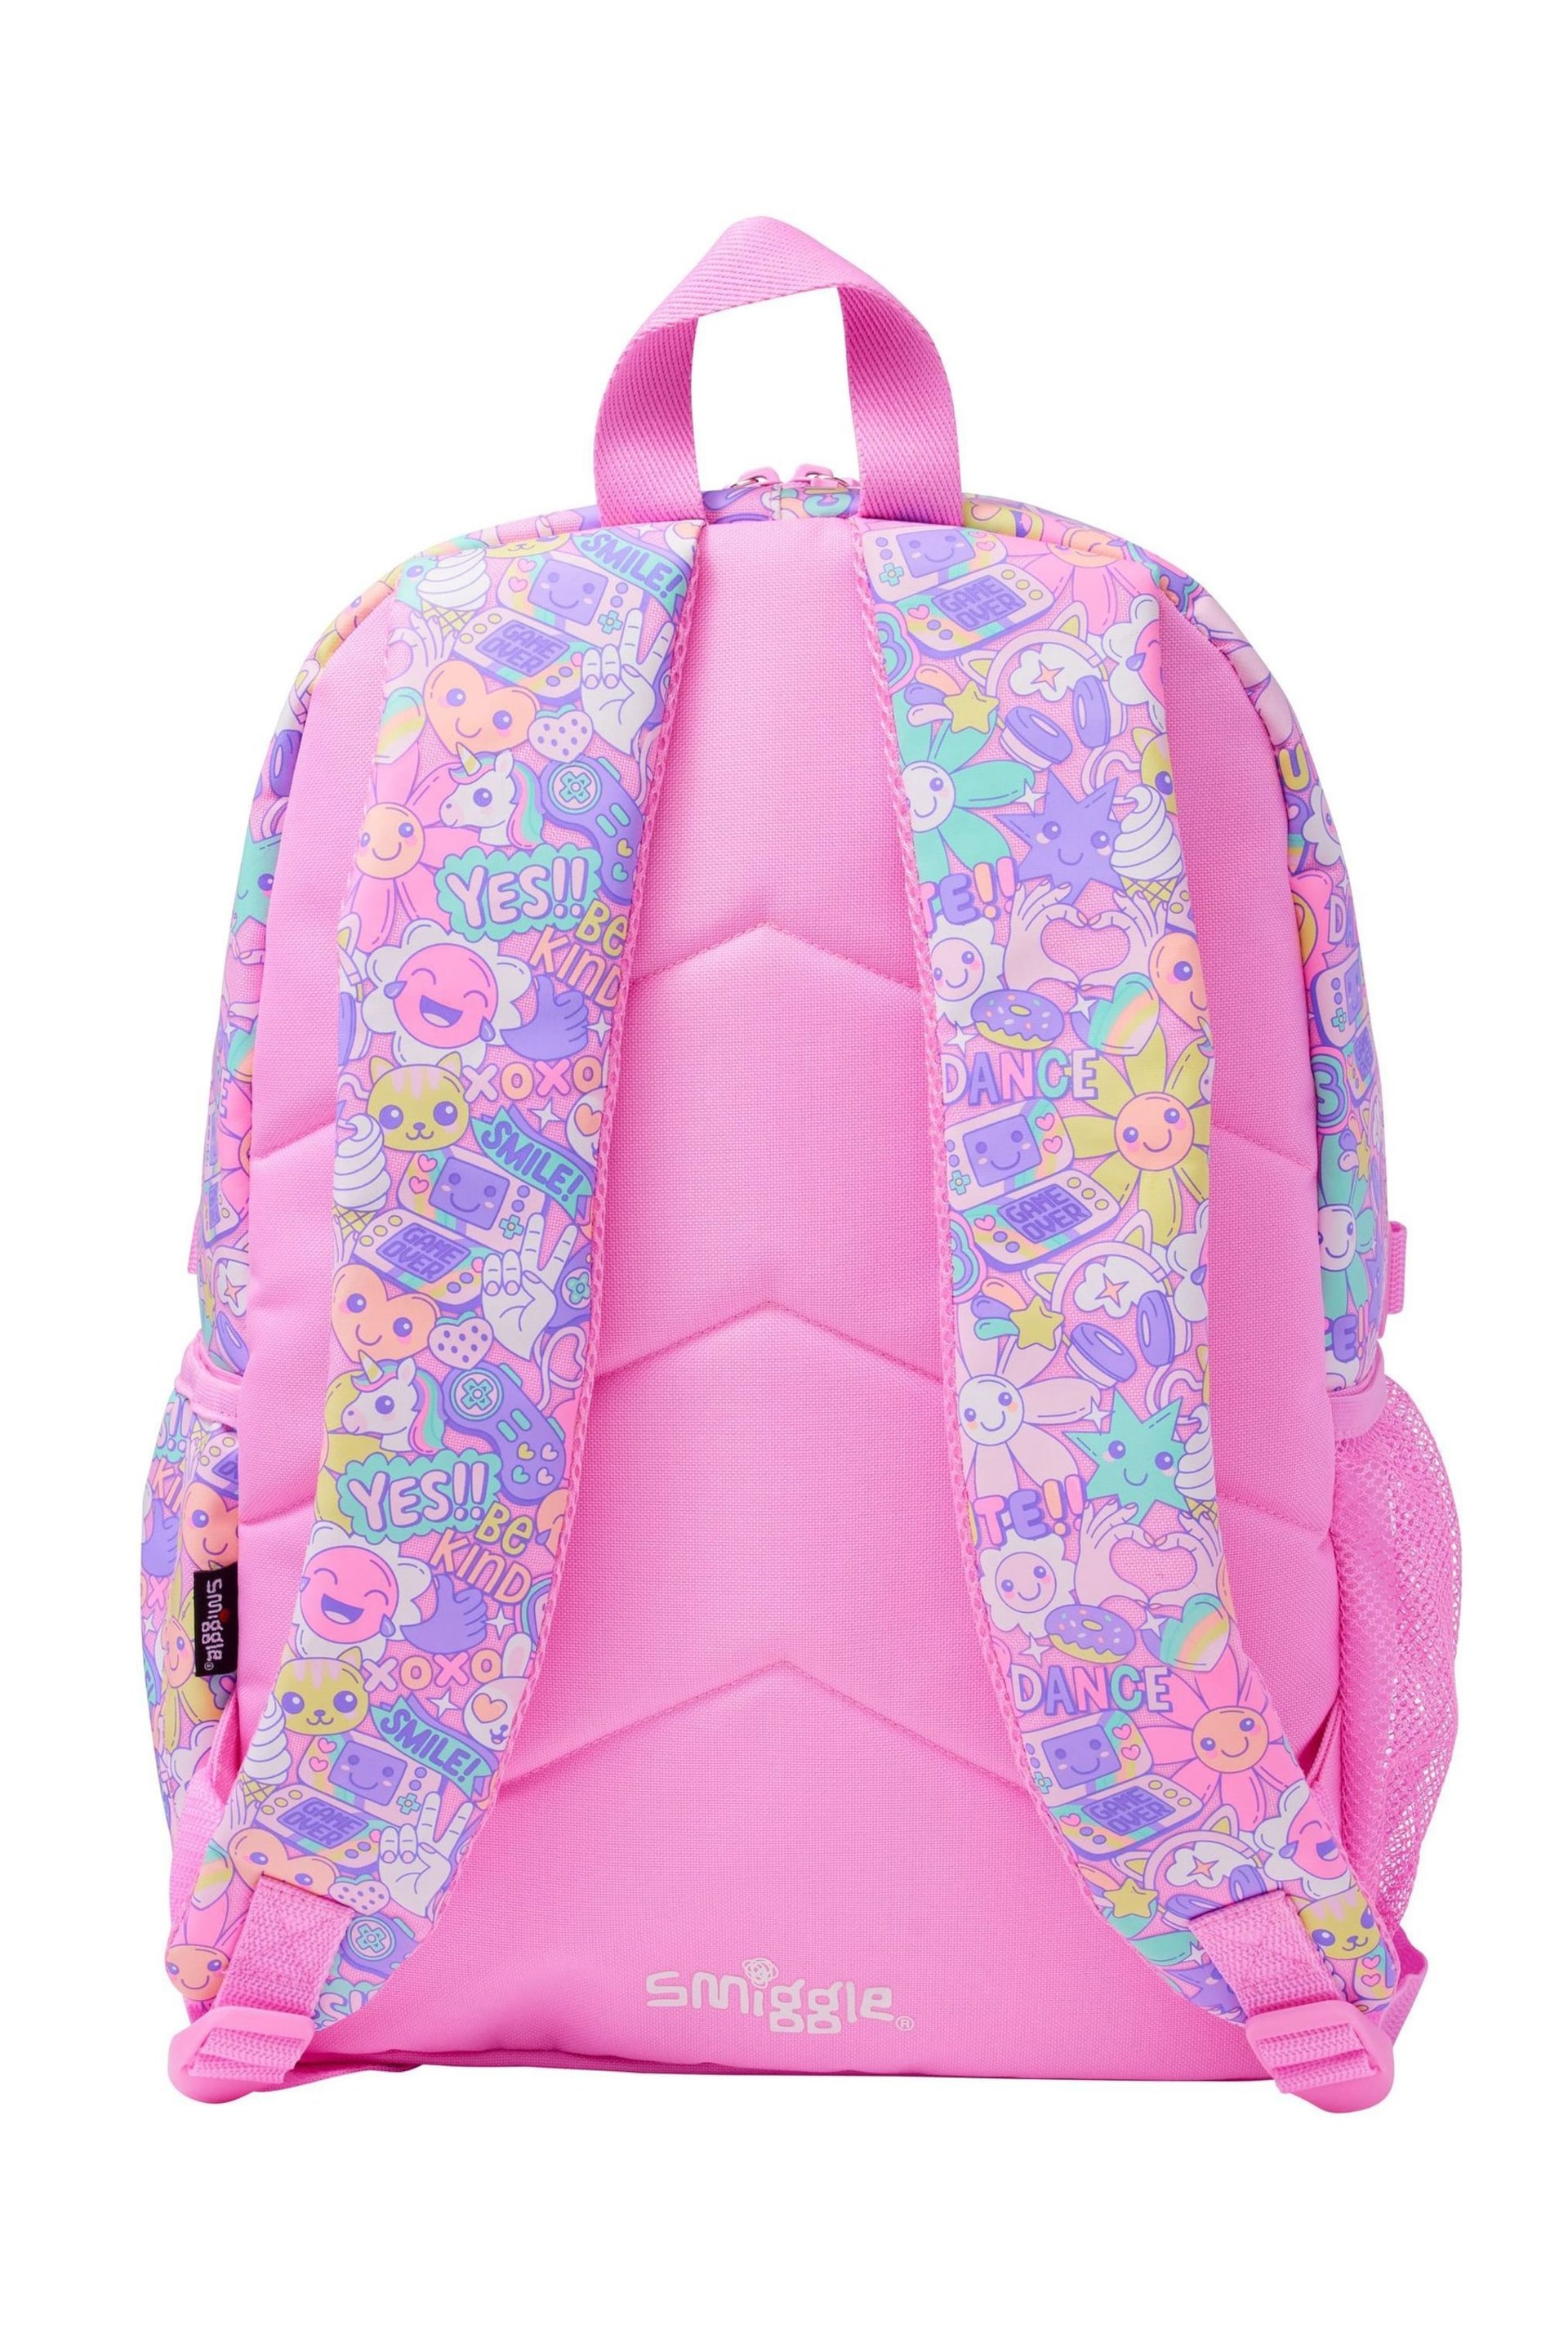 Smiggle Pink Epic Adventures Classic Attach Backpack - Image 4 of 5